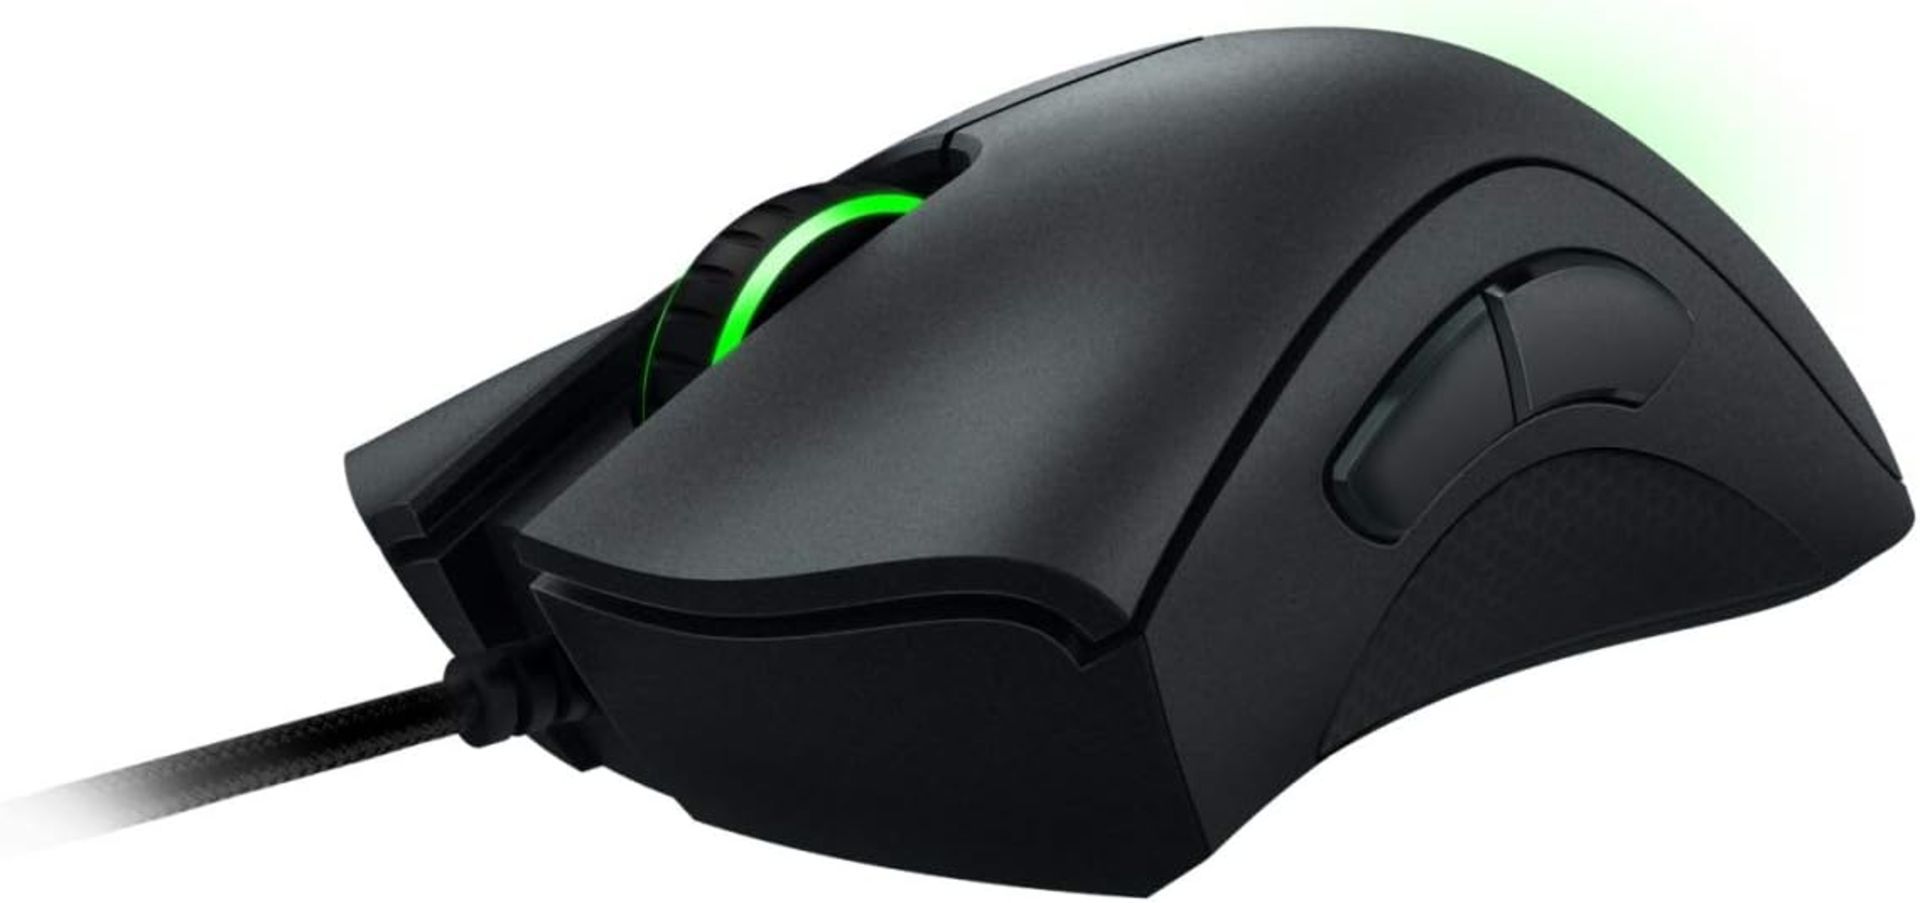 5x BRAND NEW FACTORY SEALED RAZER Deathadder Essential Gaming Mouse. RRP £22.99 EACH. The Razer - Image 4 of 5